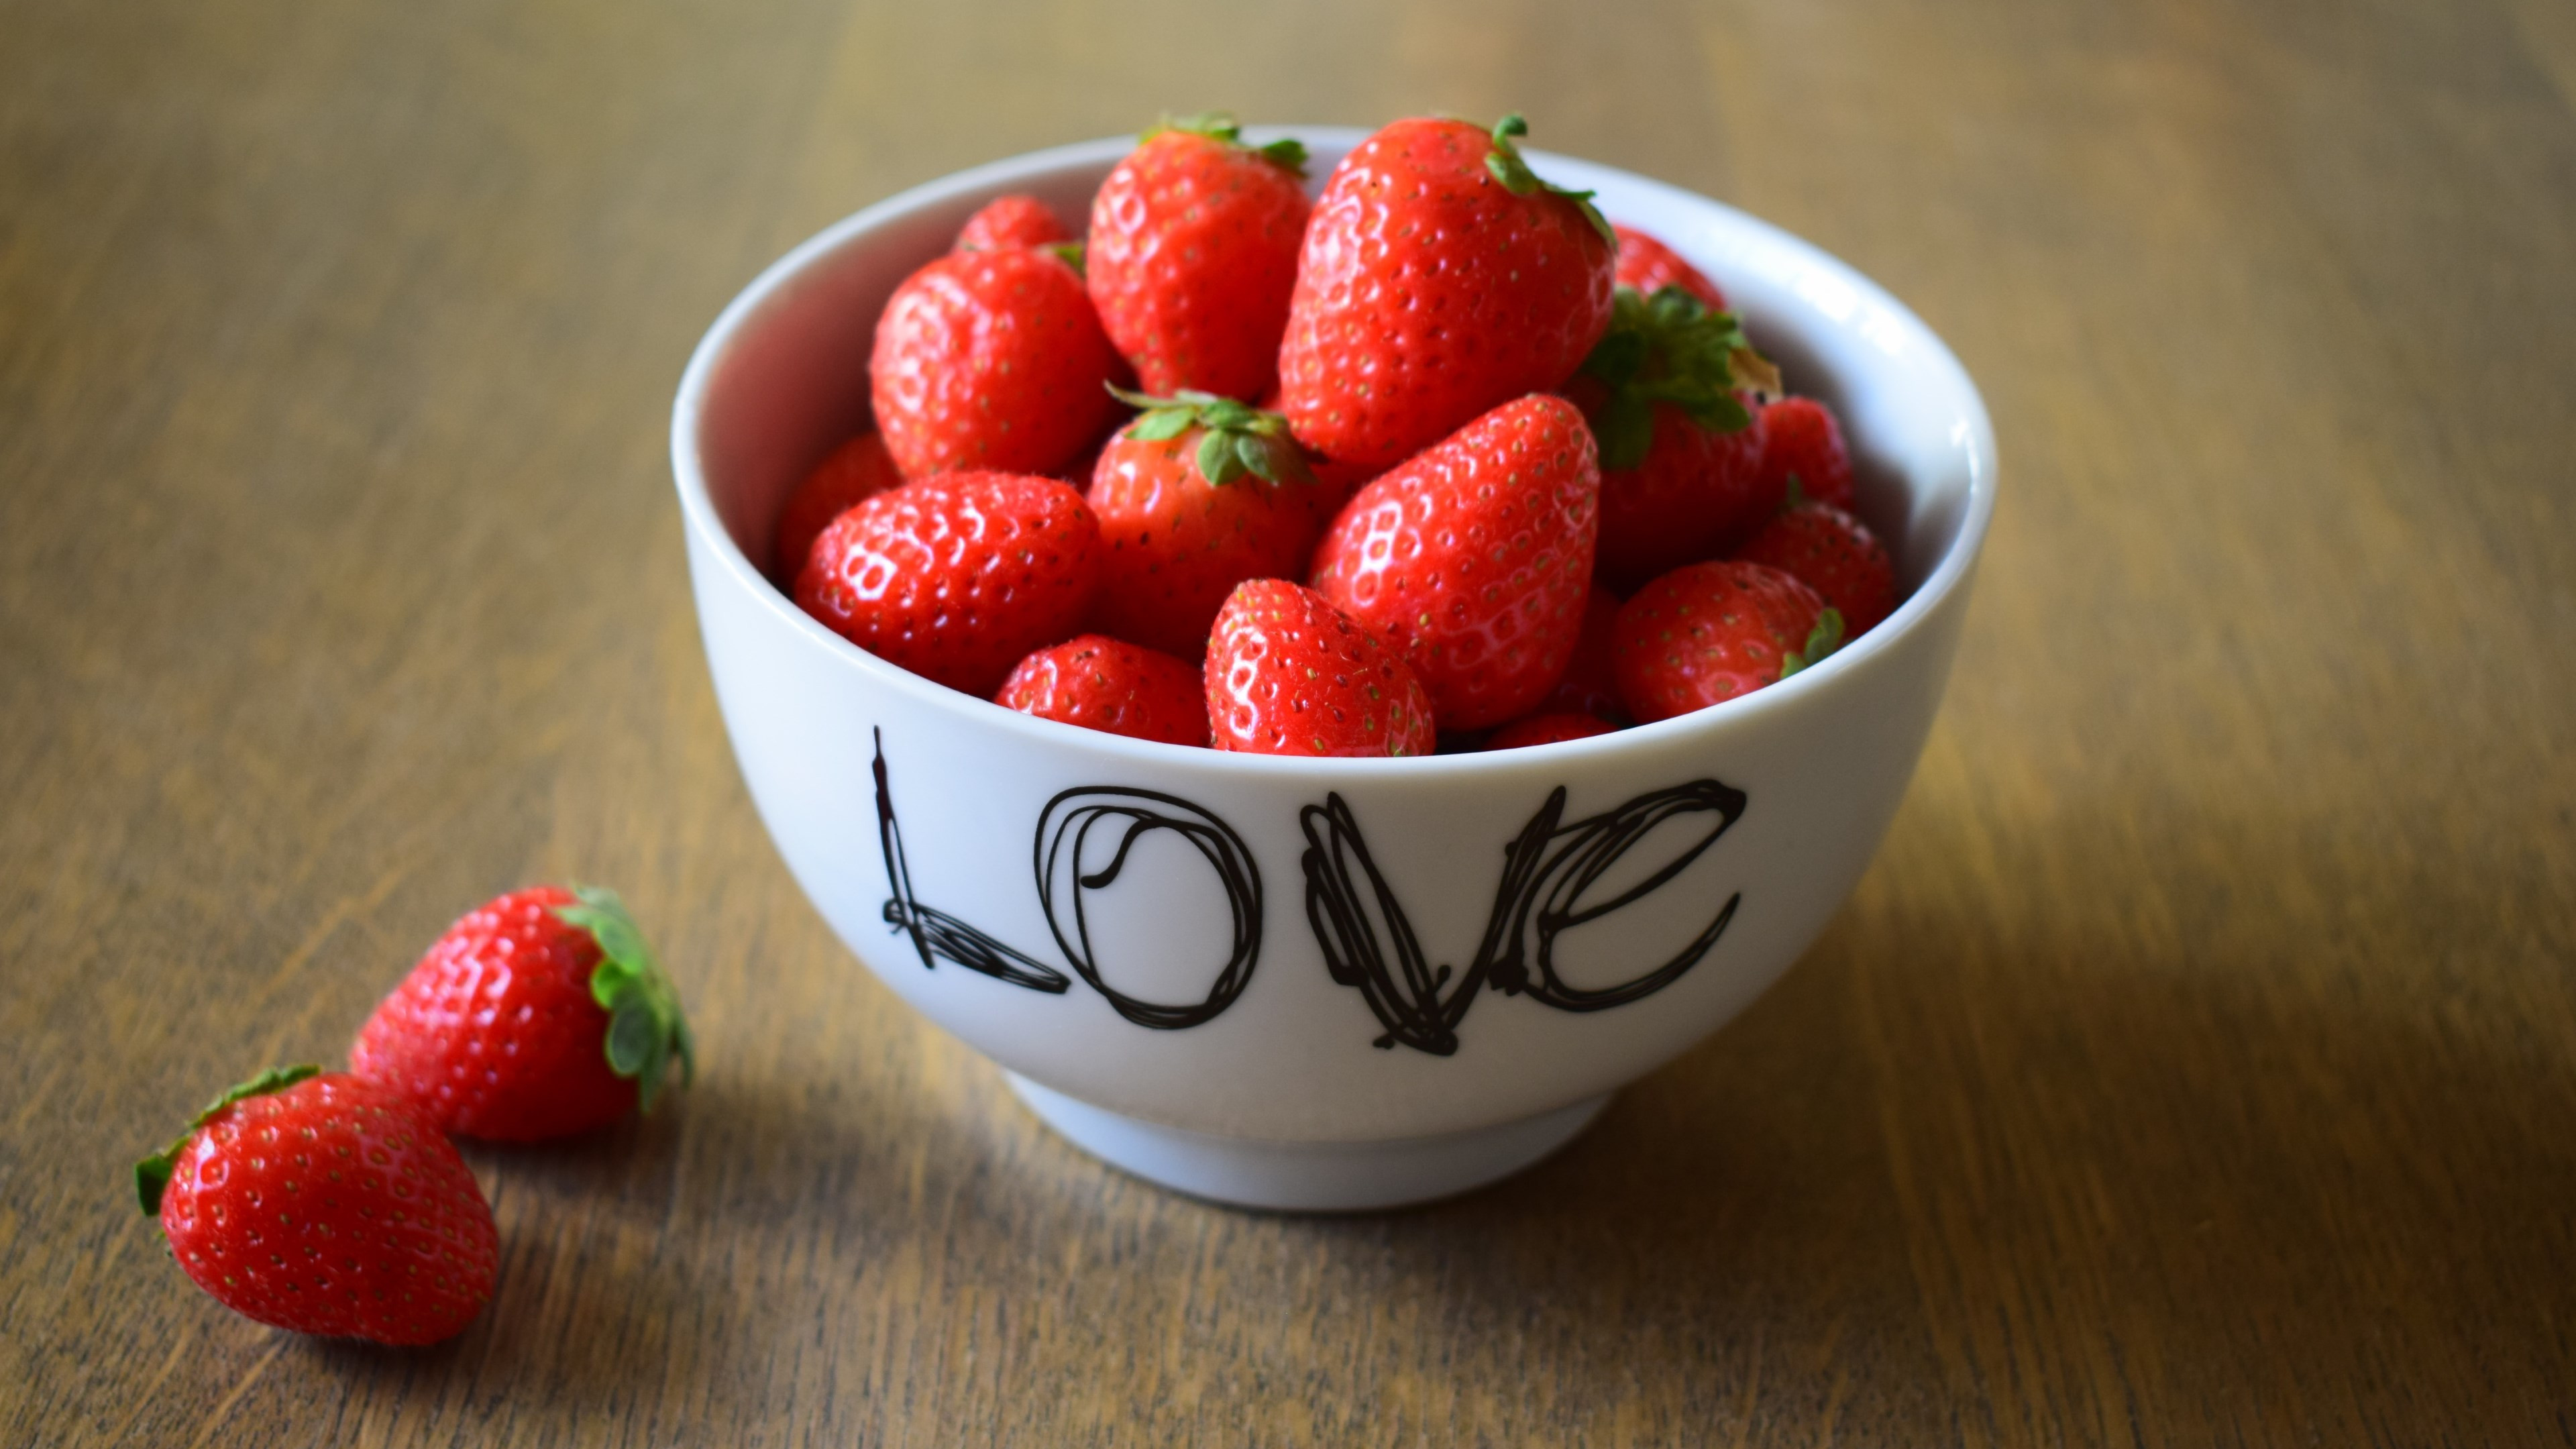 Strawberries with love wallpaper 3840x2160